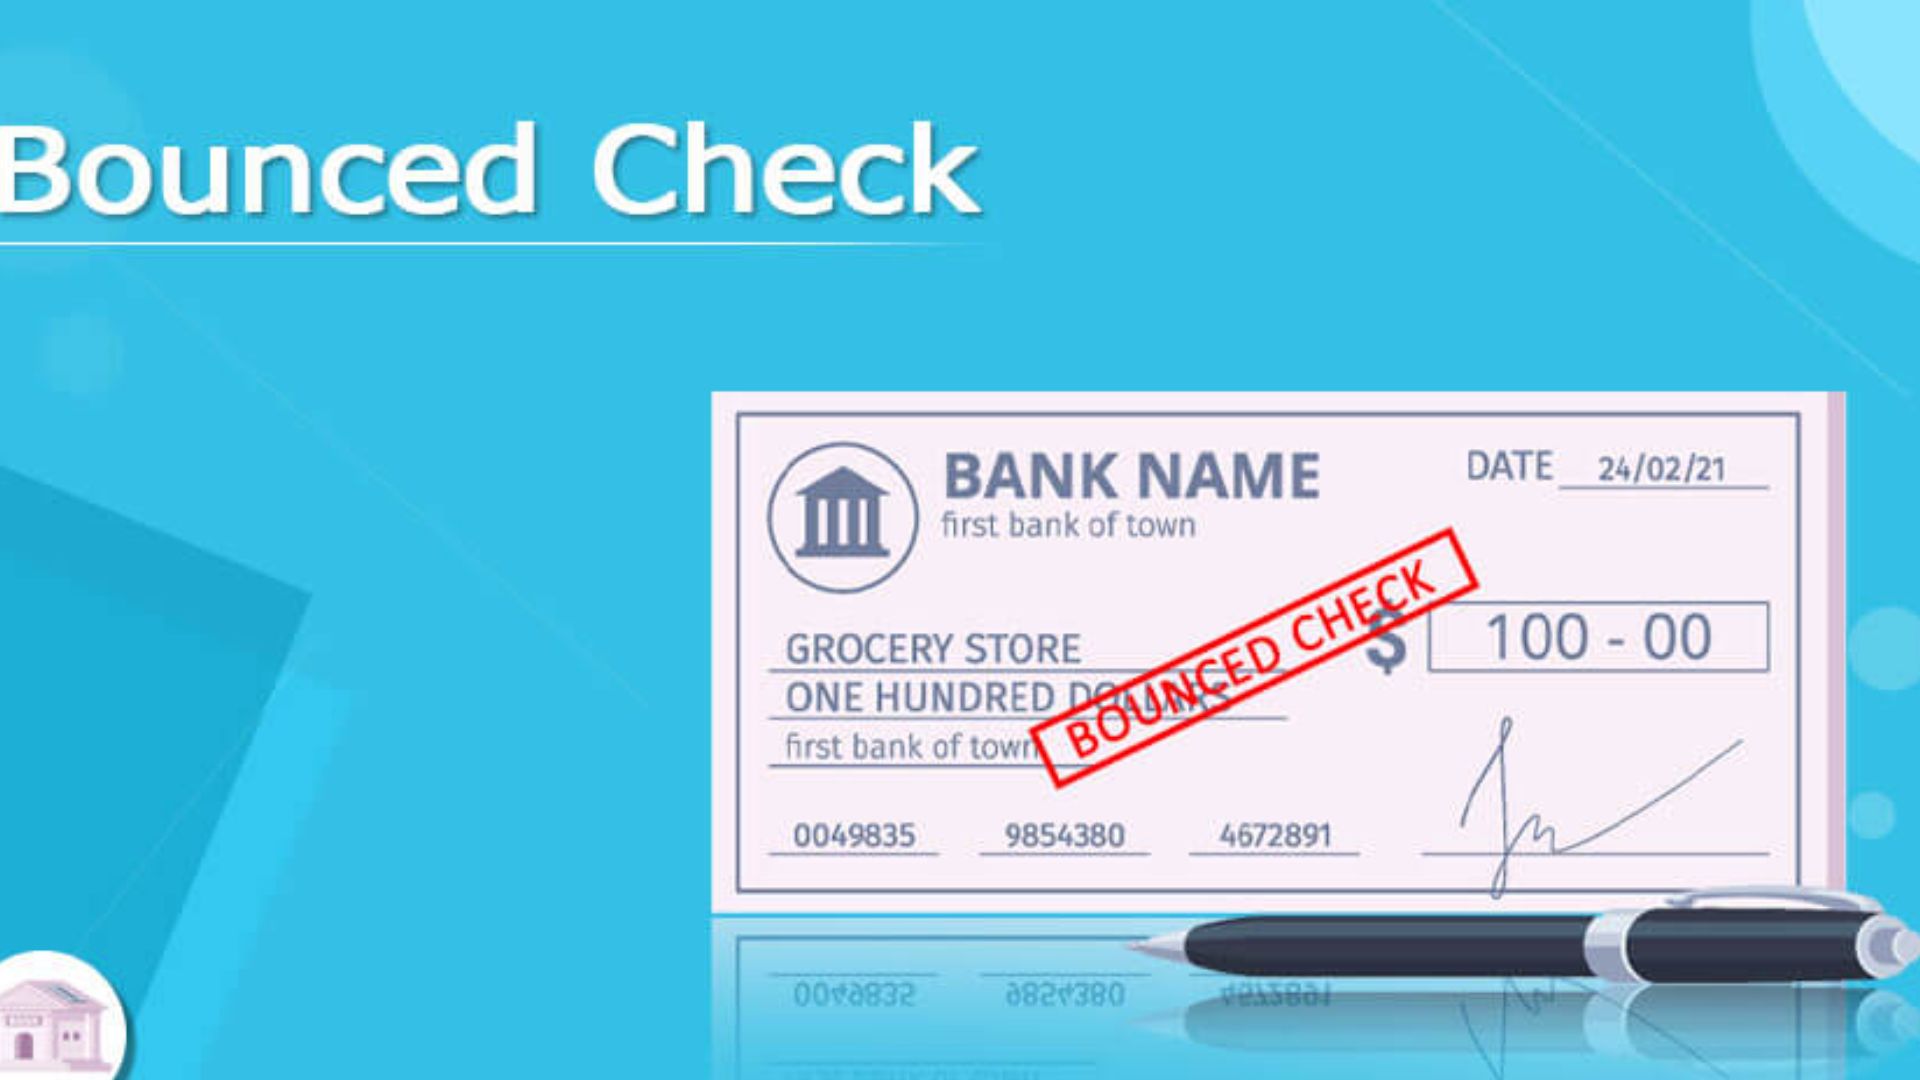 What Are The Implications Of A Bounced Check?